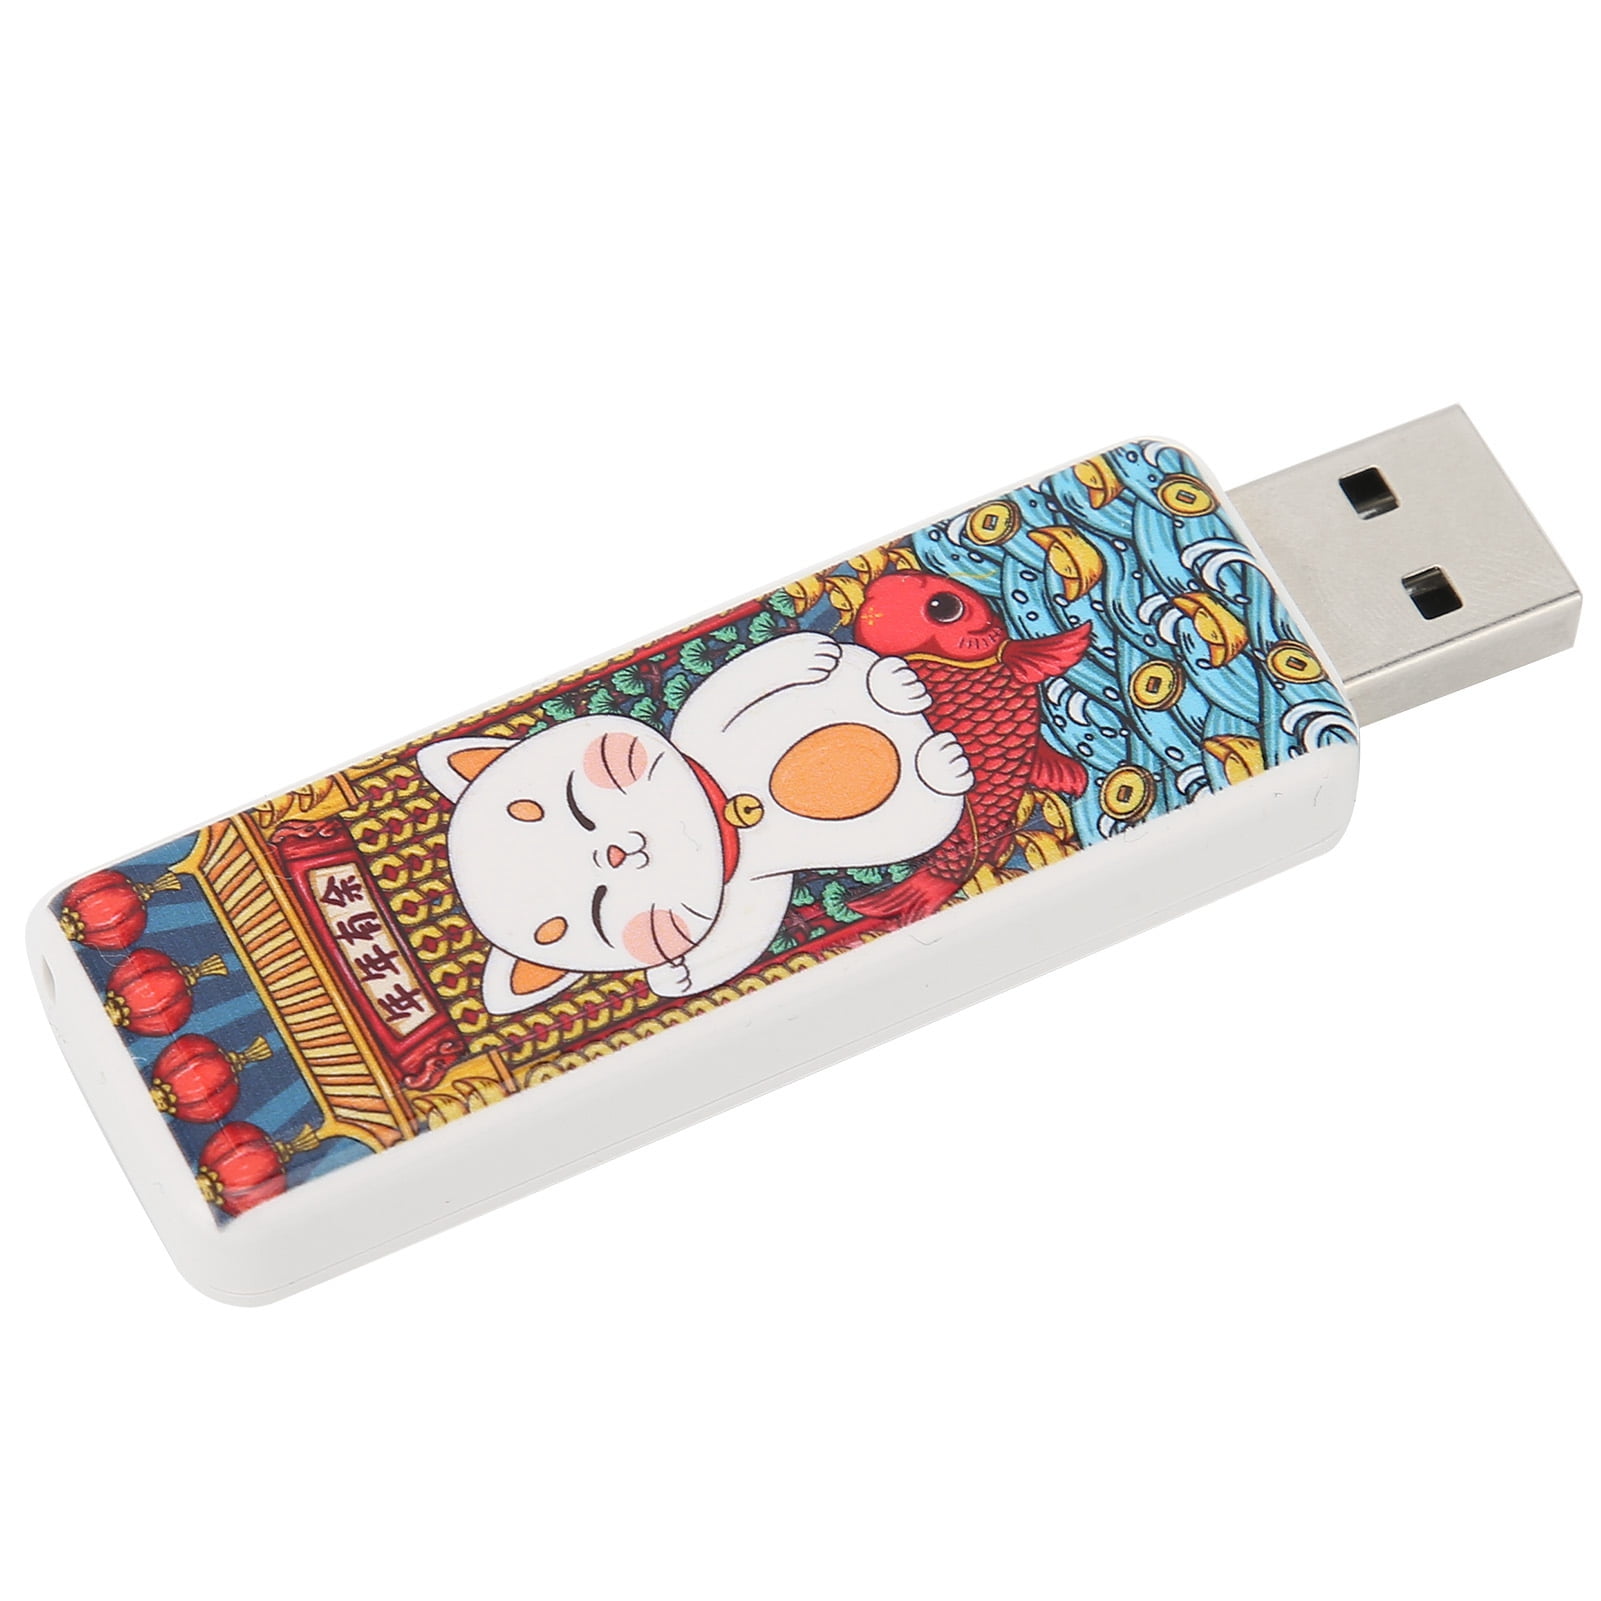 U Disk, Plug And Play High Speed Stable Transmission USB 2.0 USB Flash Drive Wide Compatibility For For For Laptop Cat Pattern 16GB | Walmart Canada